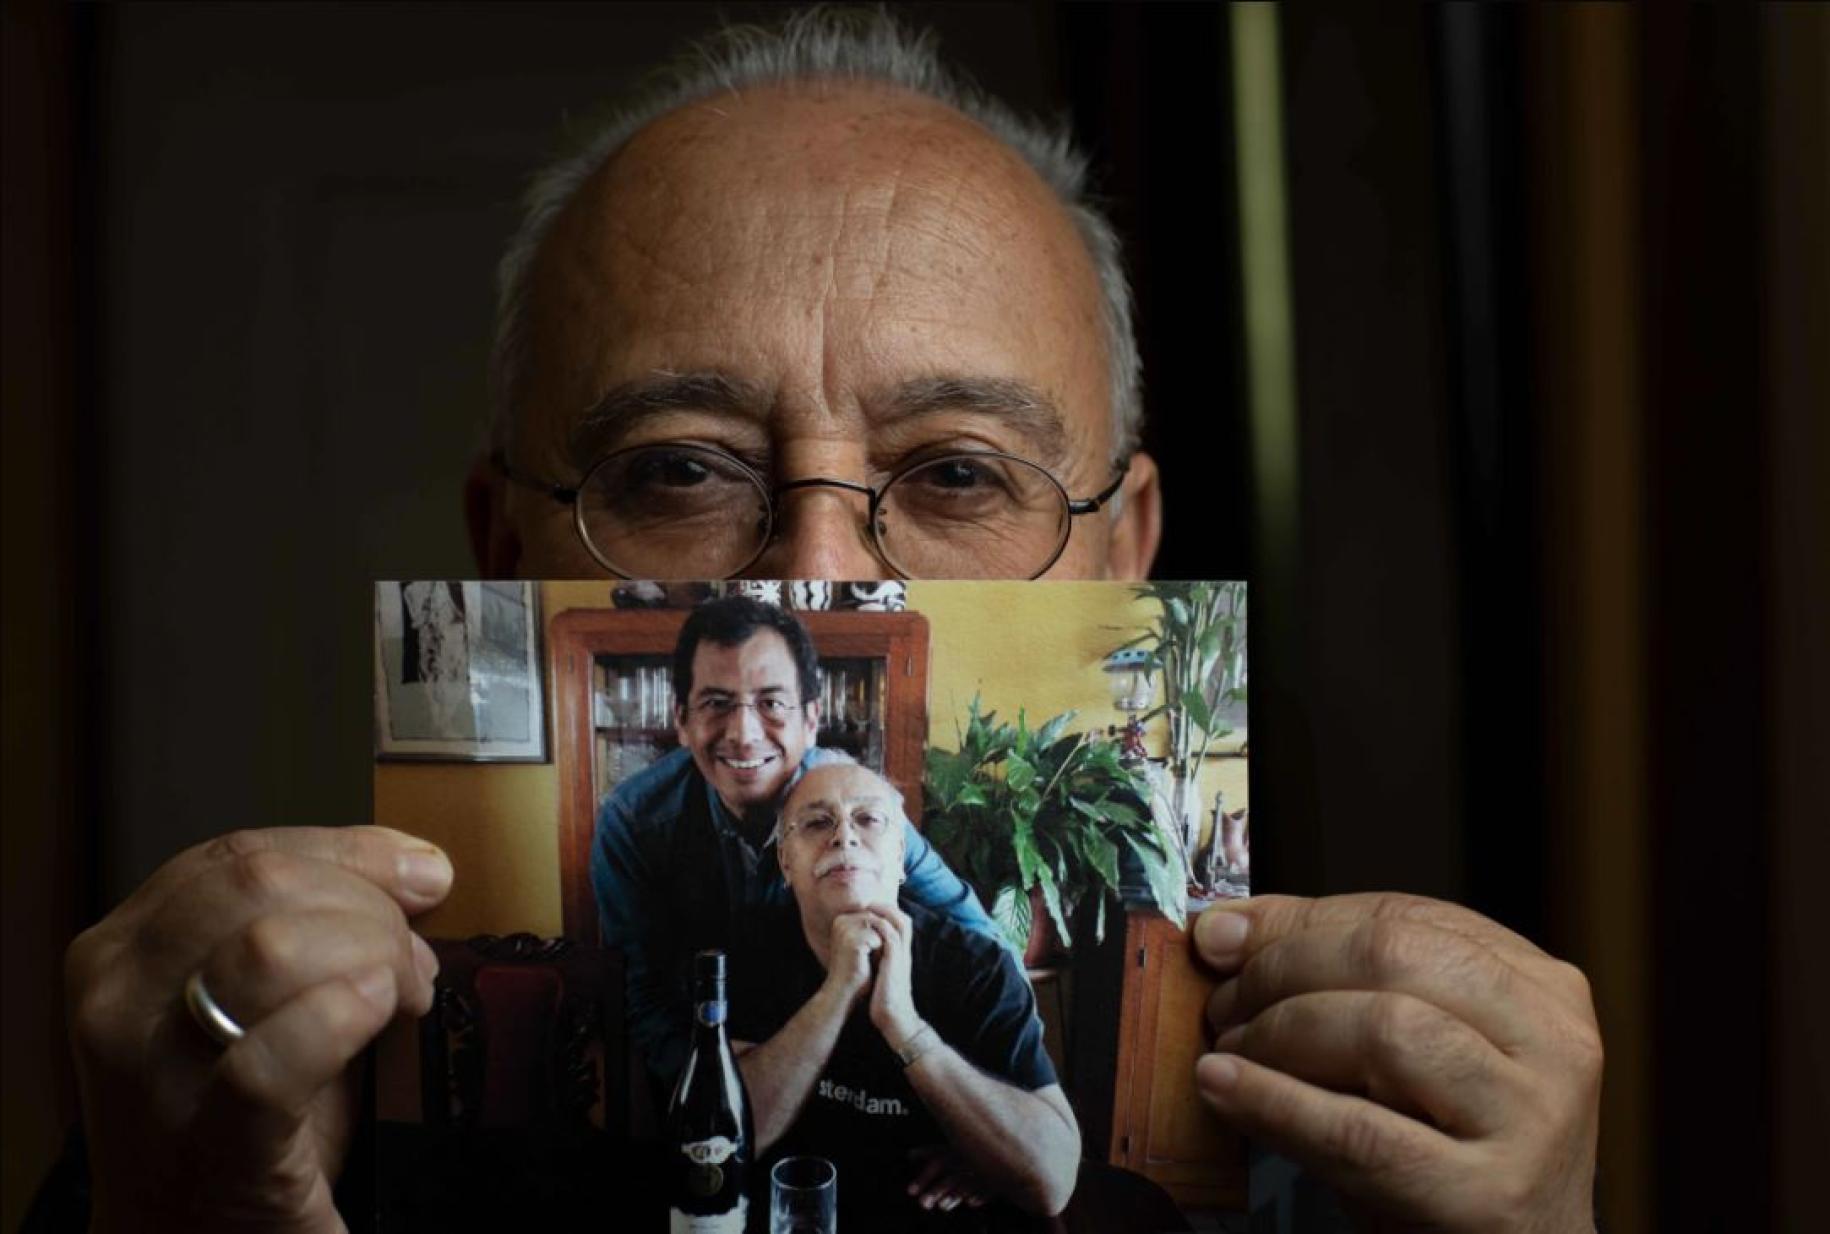 Manolo holds a photograph showing himself and his partner Martín. 